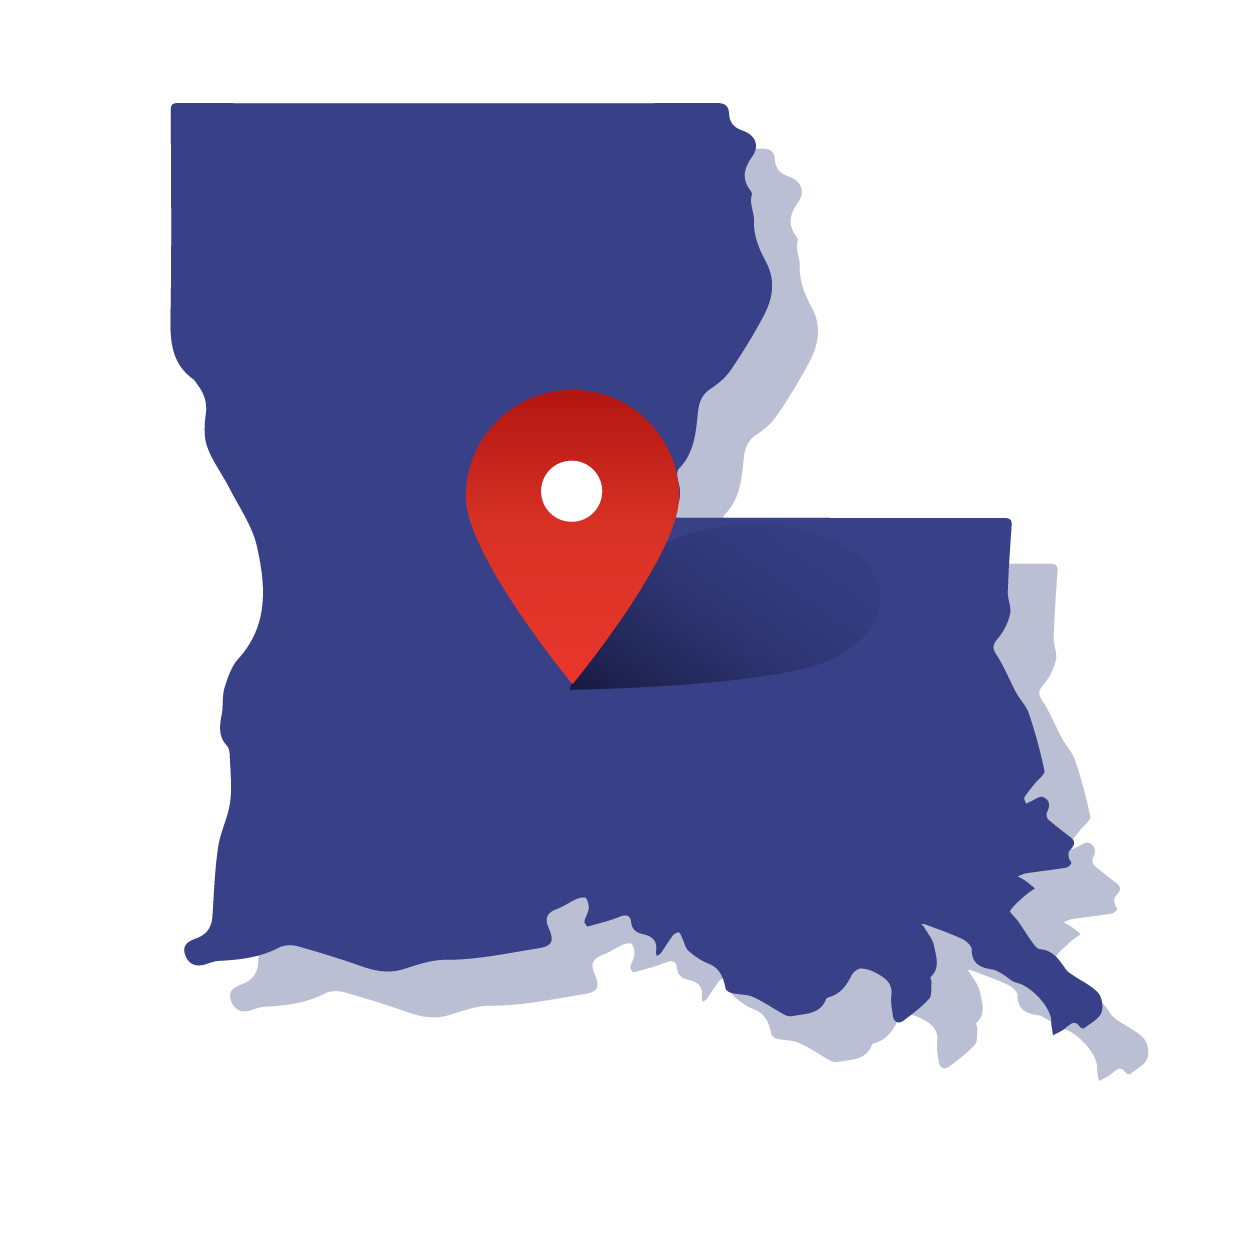 Map of Louisiana with its shape outlined, featuring a central map point and a circle representing a radius around that point for demographic analysis of zip codes.